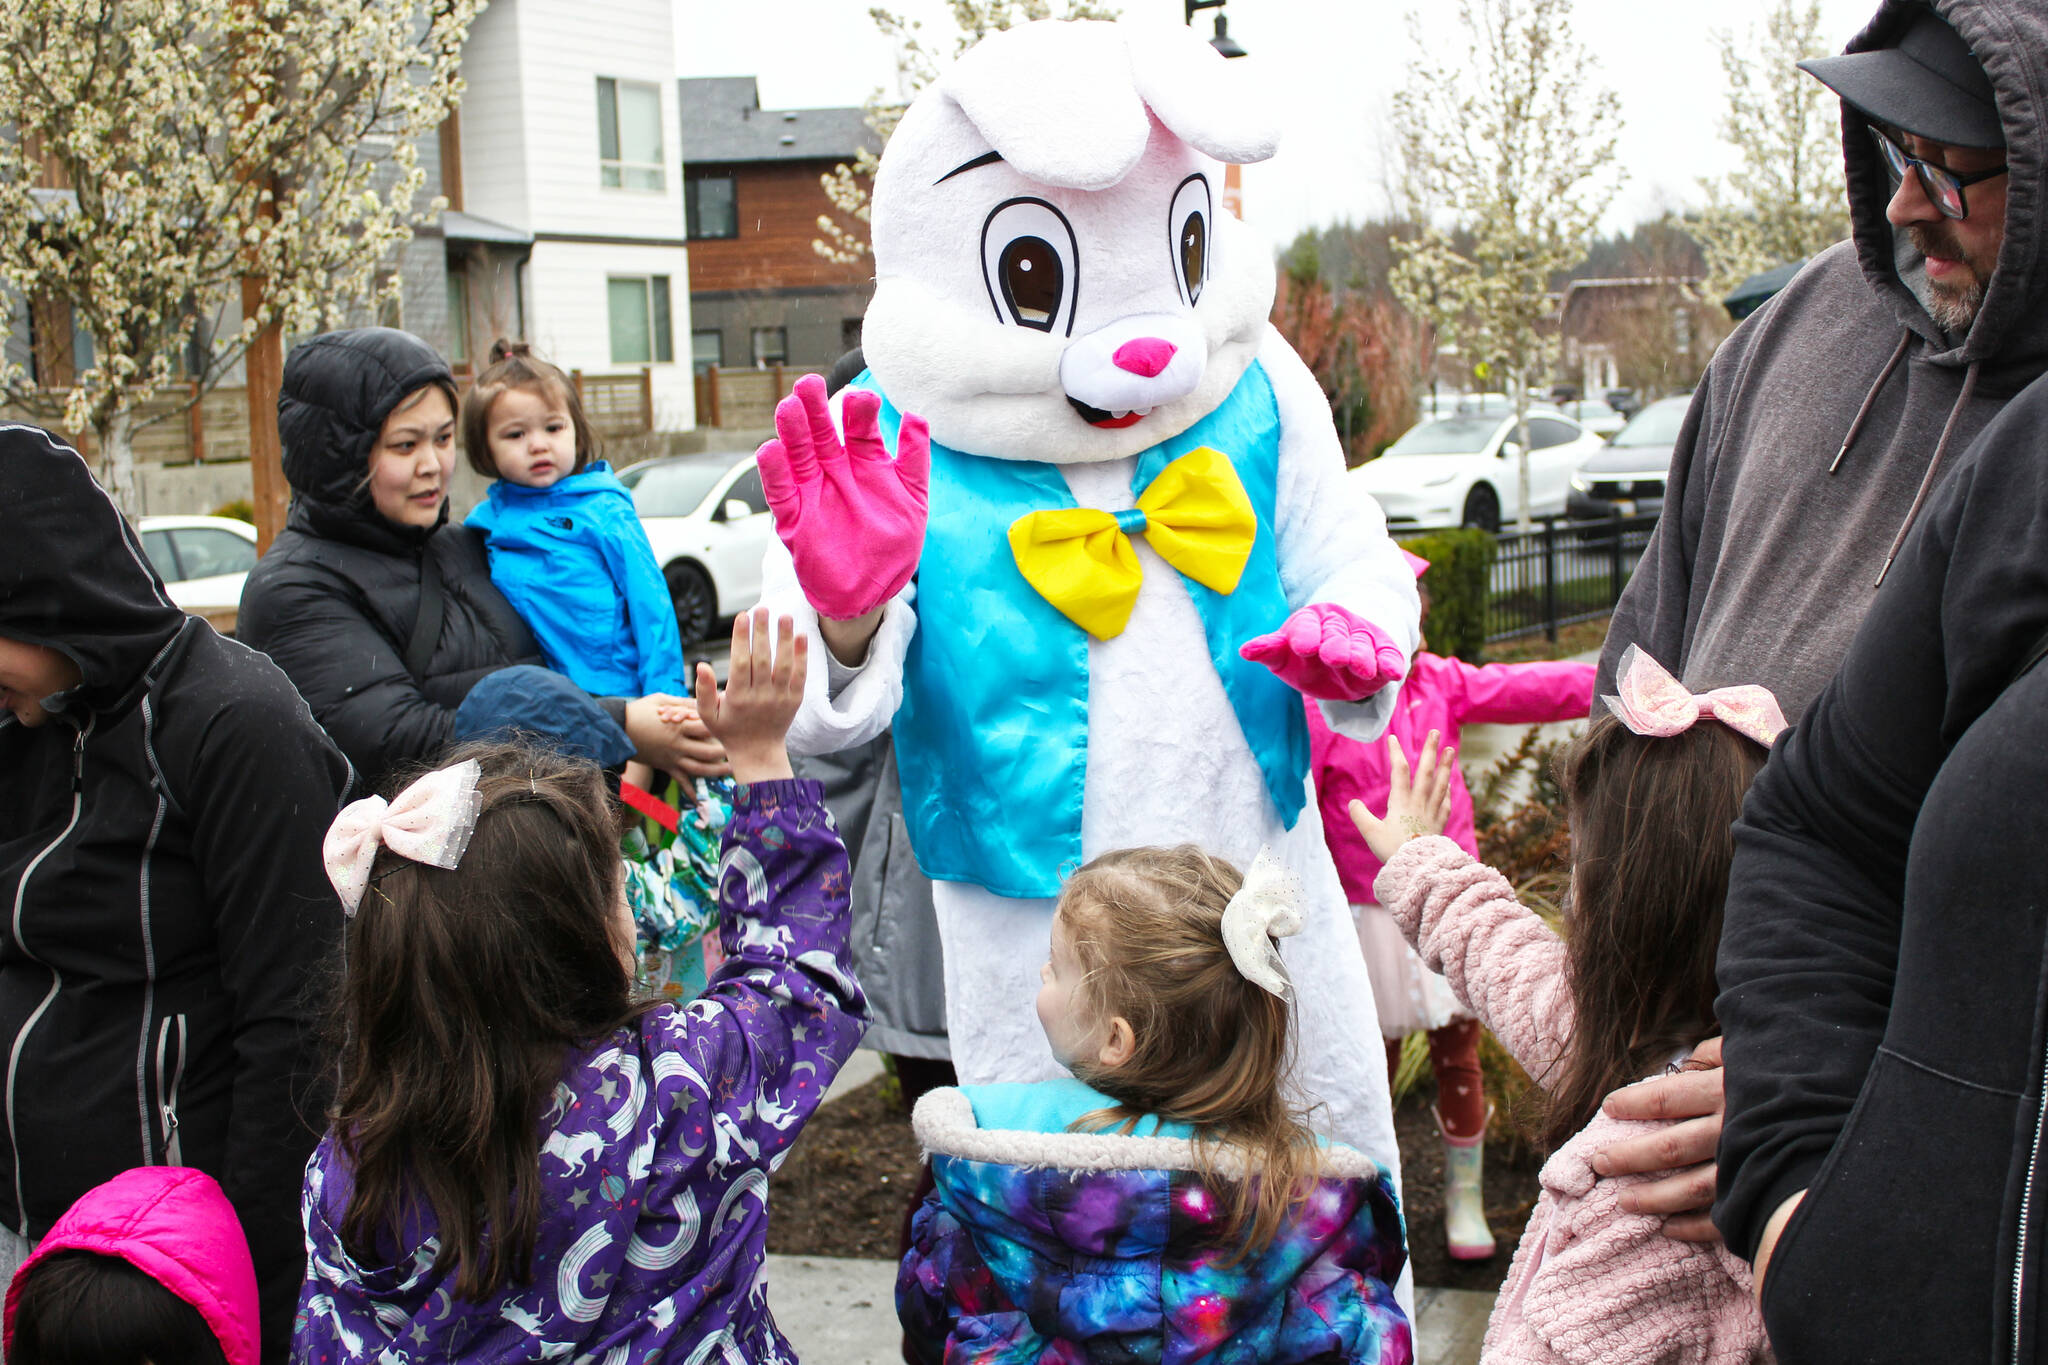 Photo by Ray Miller-Still
Which local Easter egg hunt will you be attending this year? Pictured is a group of sisters high-fiving the Easter Bunny at the Ten Trails event last year. Please note that the neighborhood is not doing an egg hunt this year, but will be hosting an Easter Carnival.